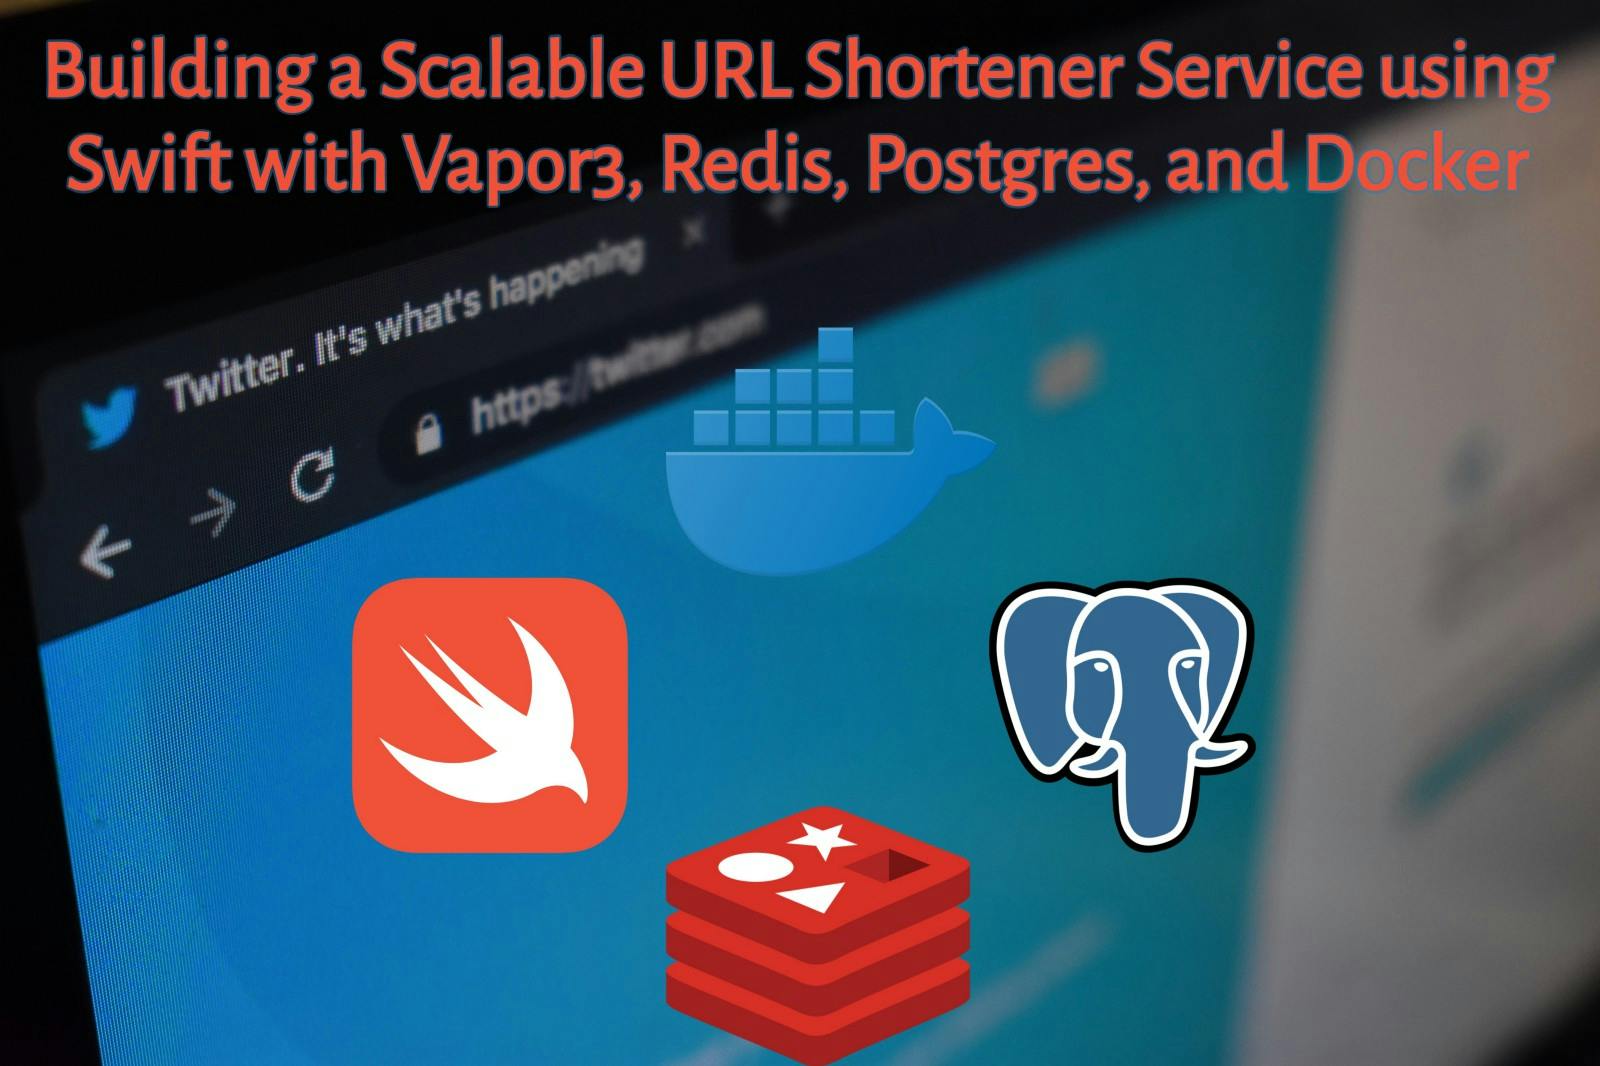 featured image - Building a Scalable URL Shortener Service using Swift with Vapor3